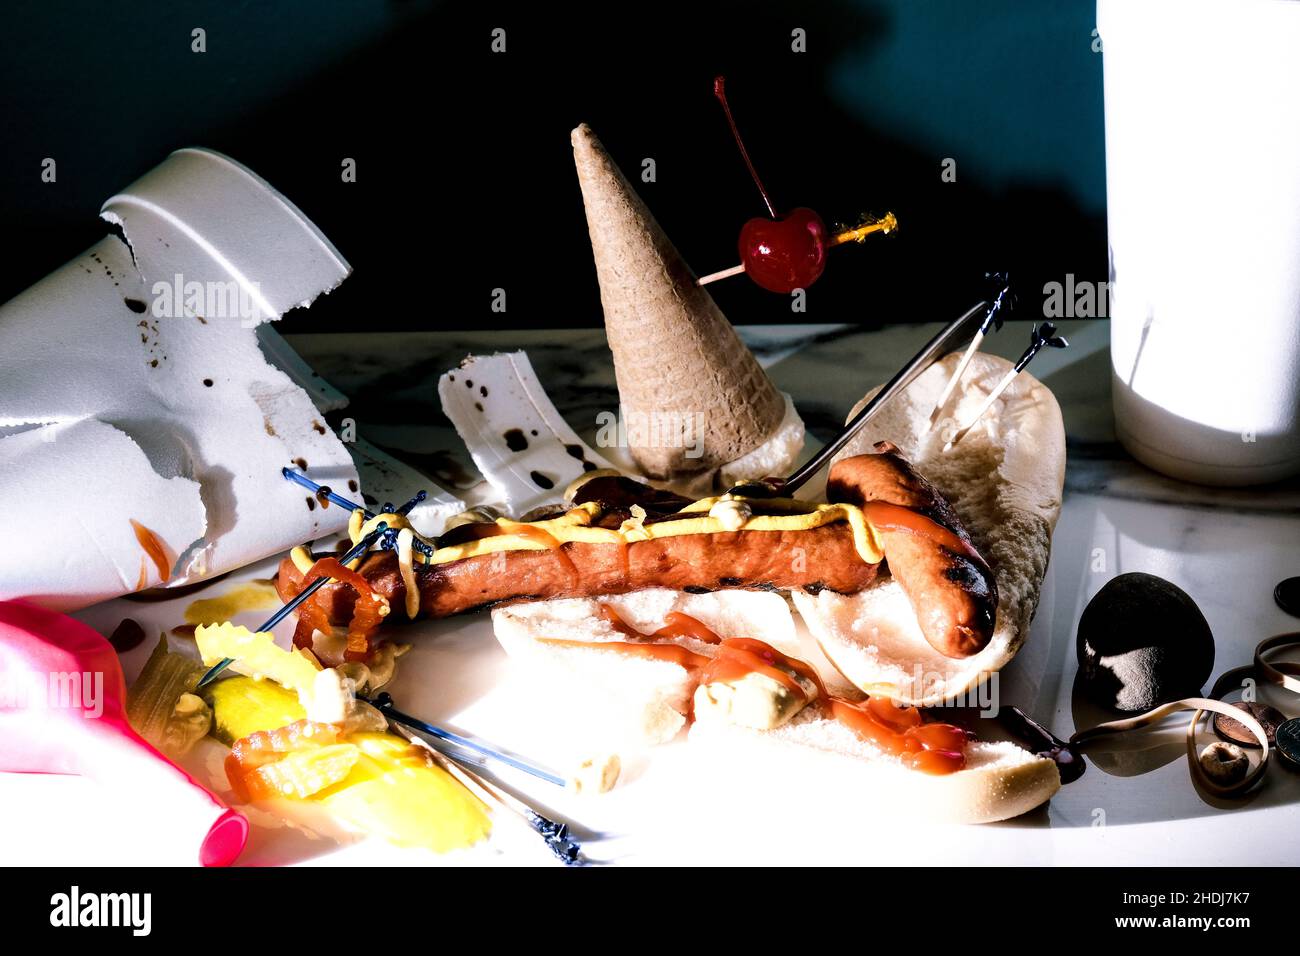 Hot dog and icecream cone mess after fun barbecue party Stock Photo